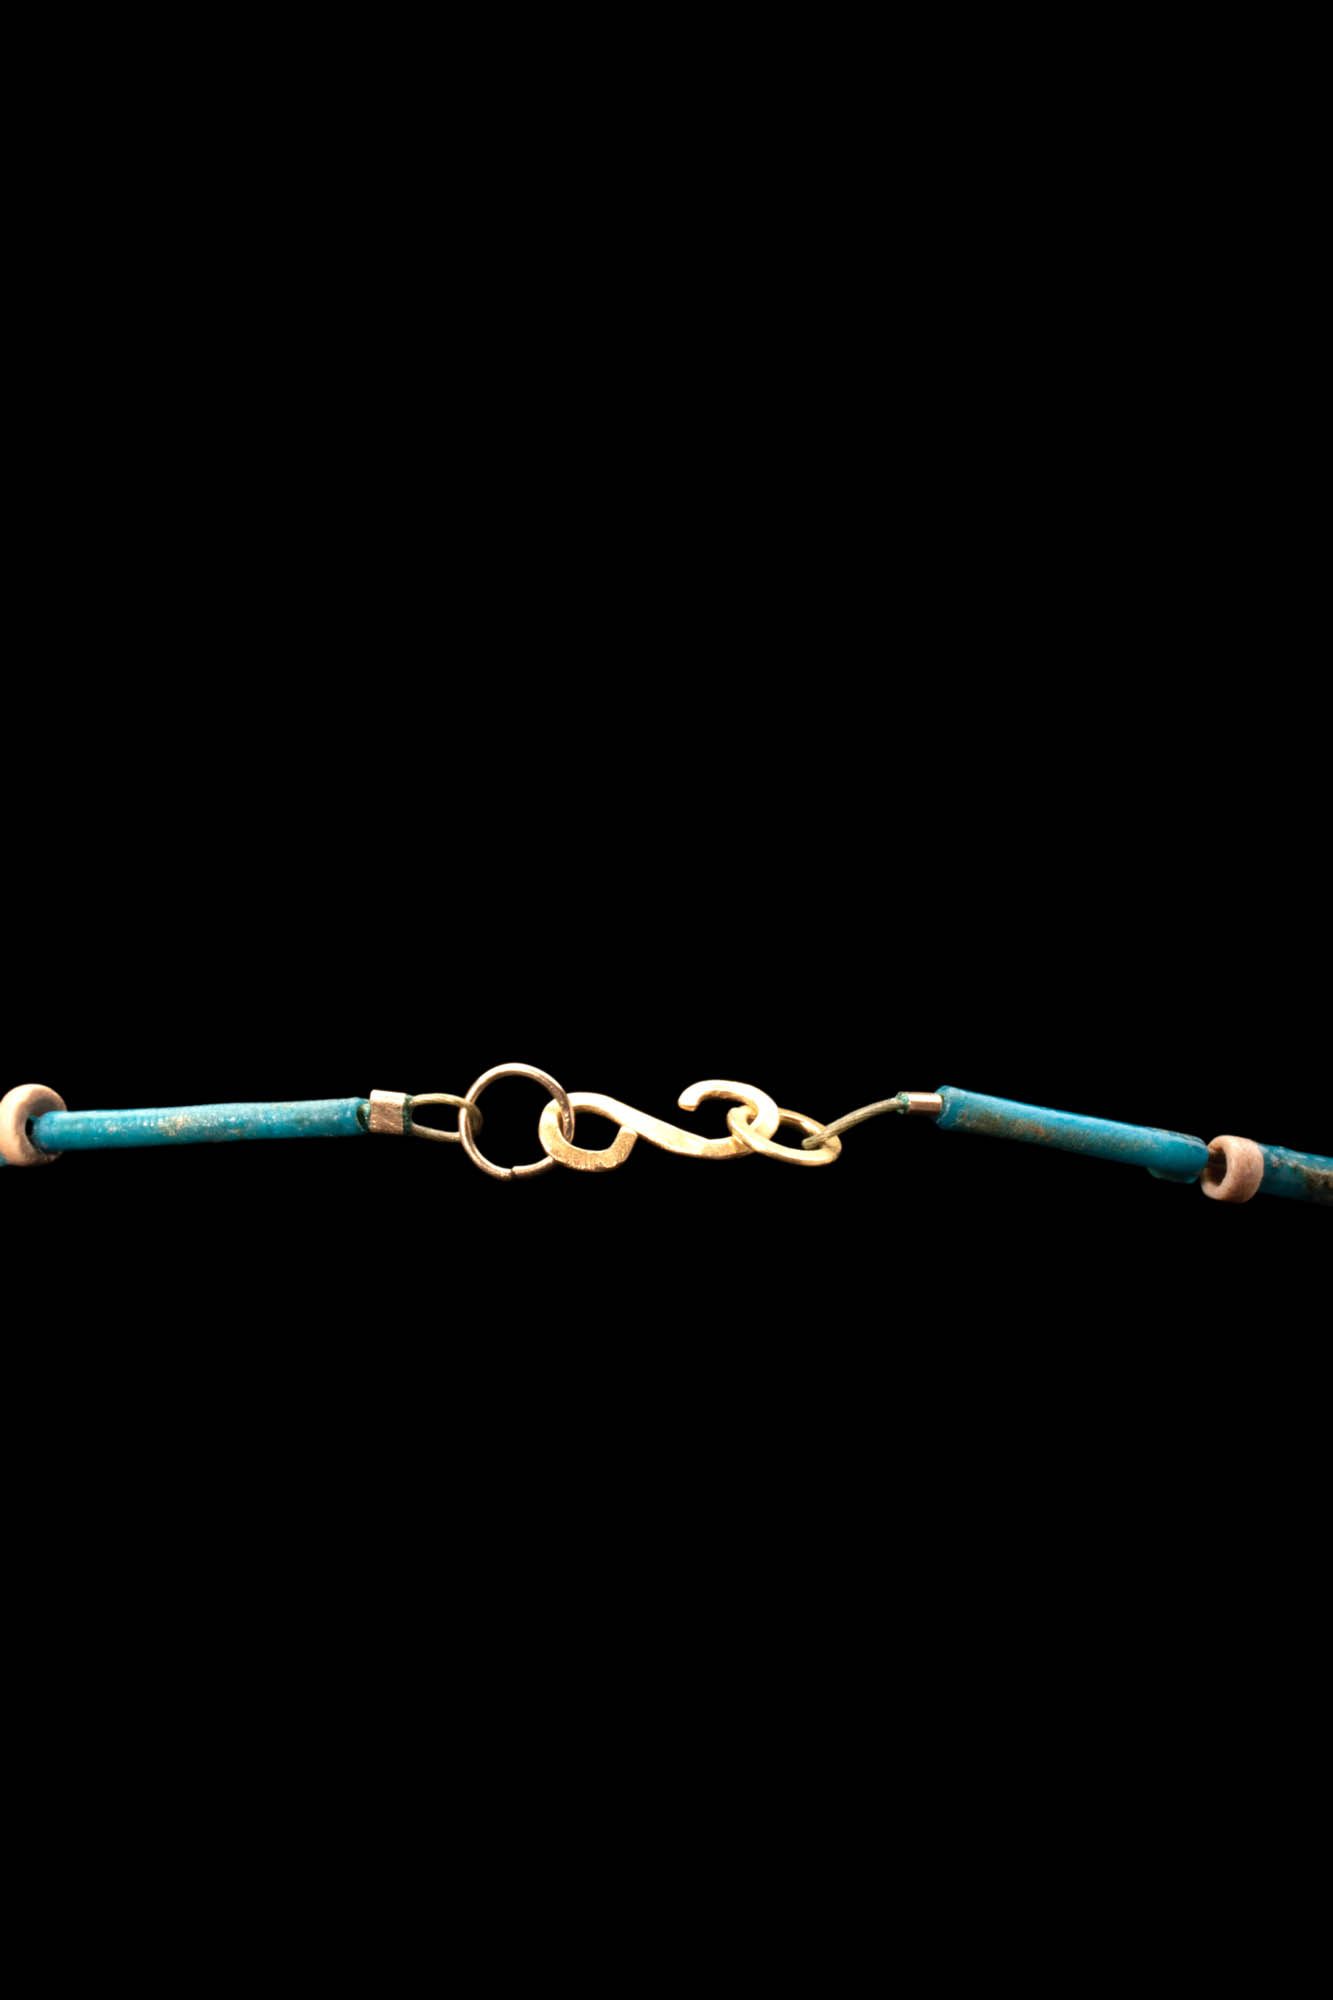 EGYPTIAN FAIENCE NECKLACE WITH RARE SCARABS - Image 7 of 7